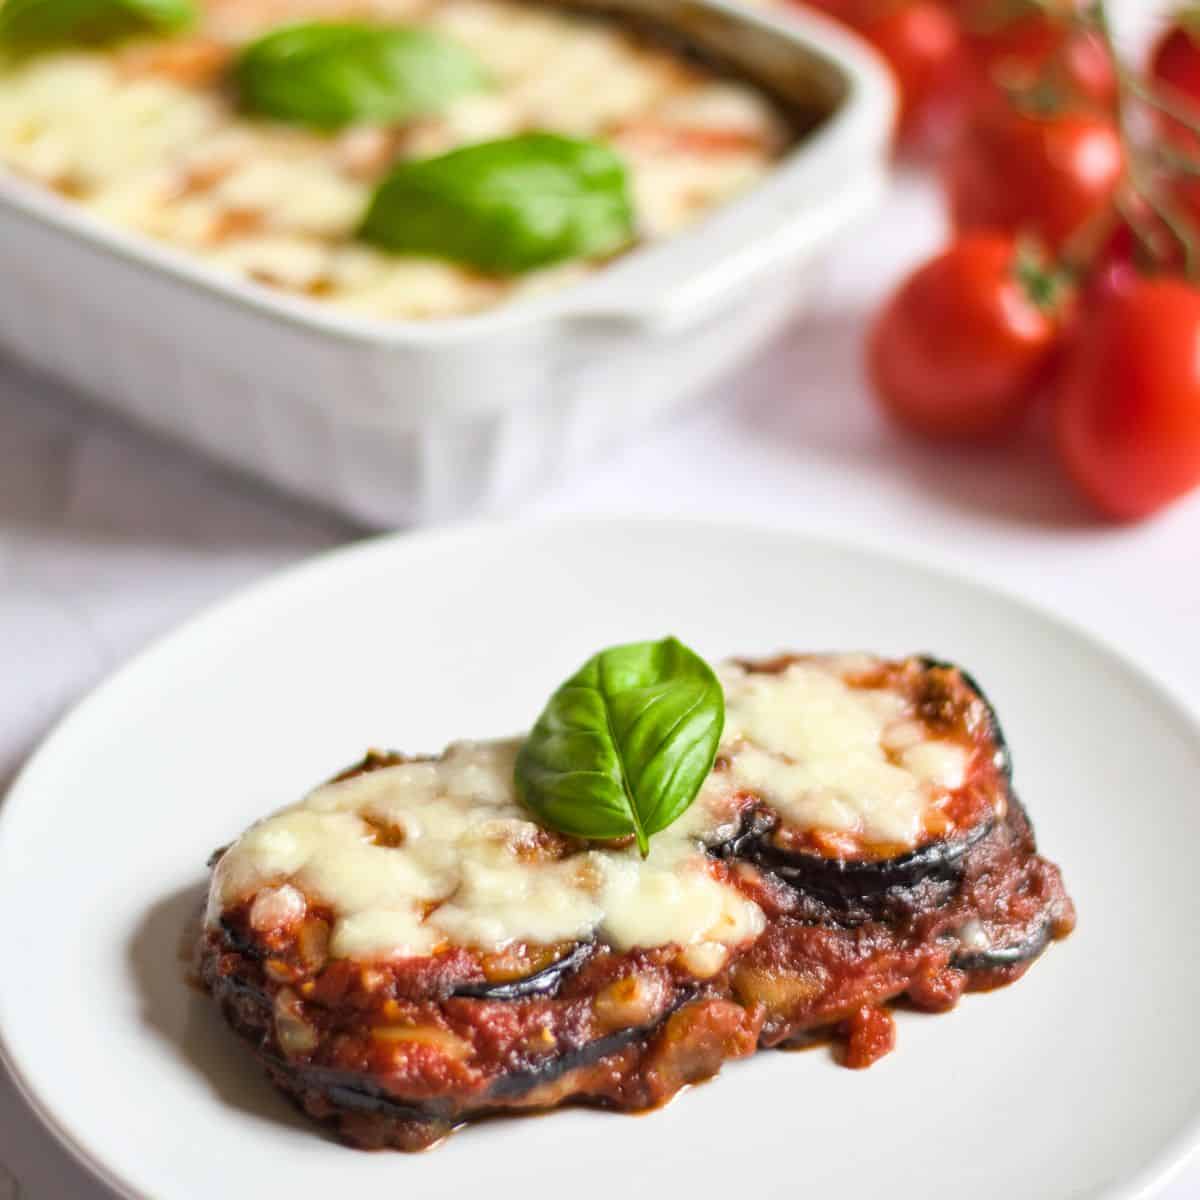 Baked Eggplant Parmesan Without Breadcrumbs Recipe on a white plate.